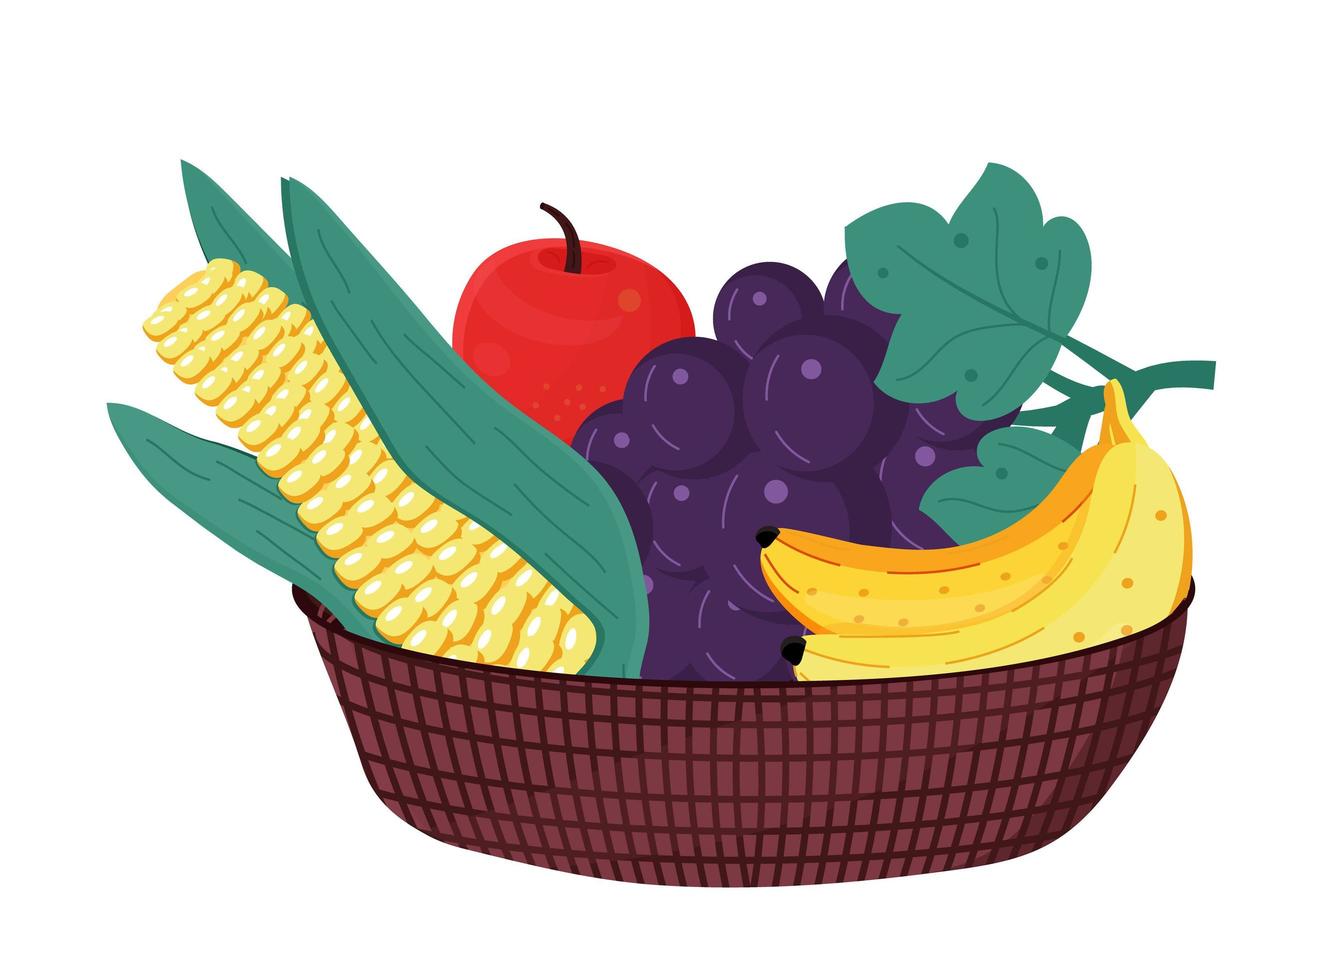 Fruits in wooden bowl. Corn, banana, apple, grape are inside of basket. Healthy eating, harvest concept vector